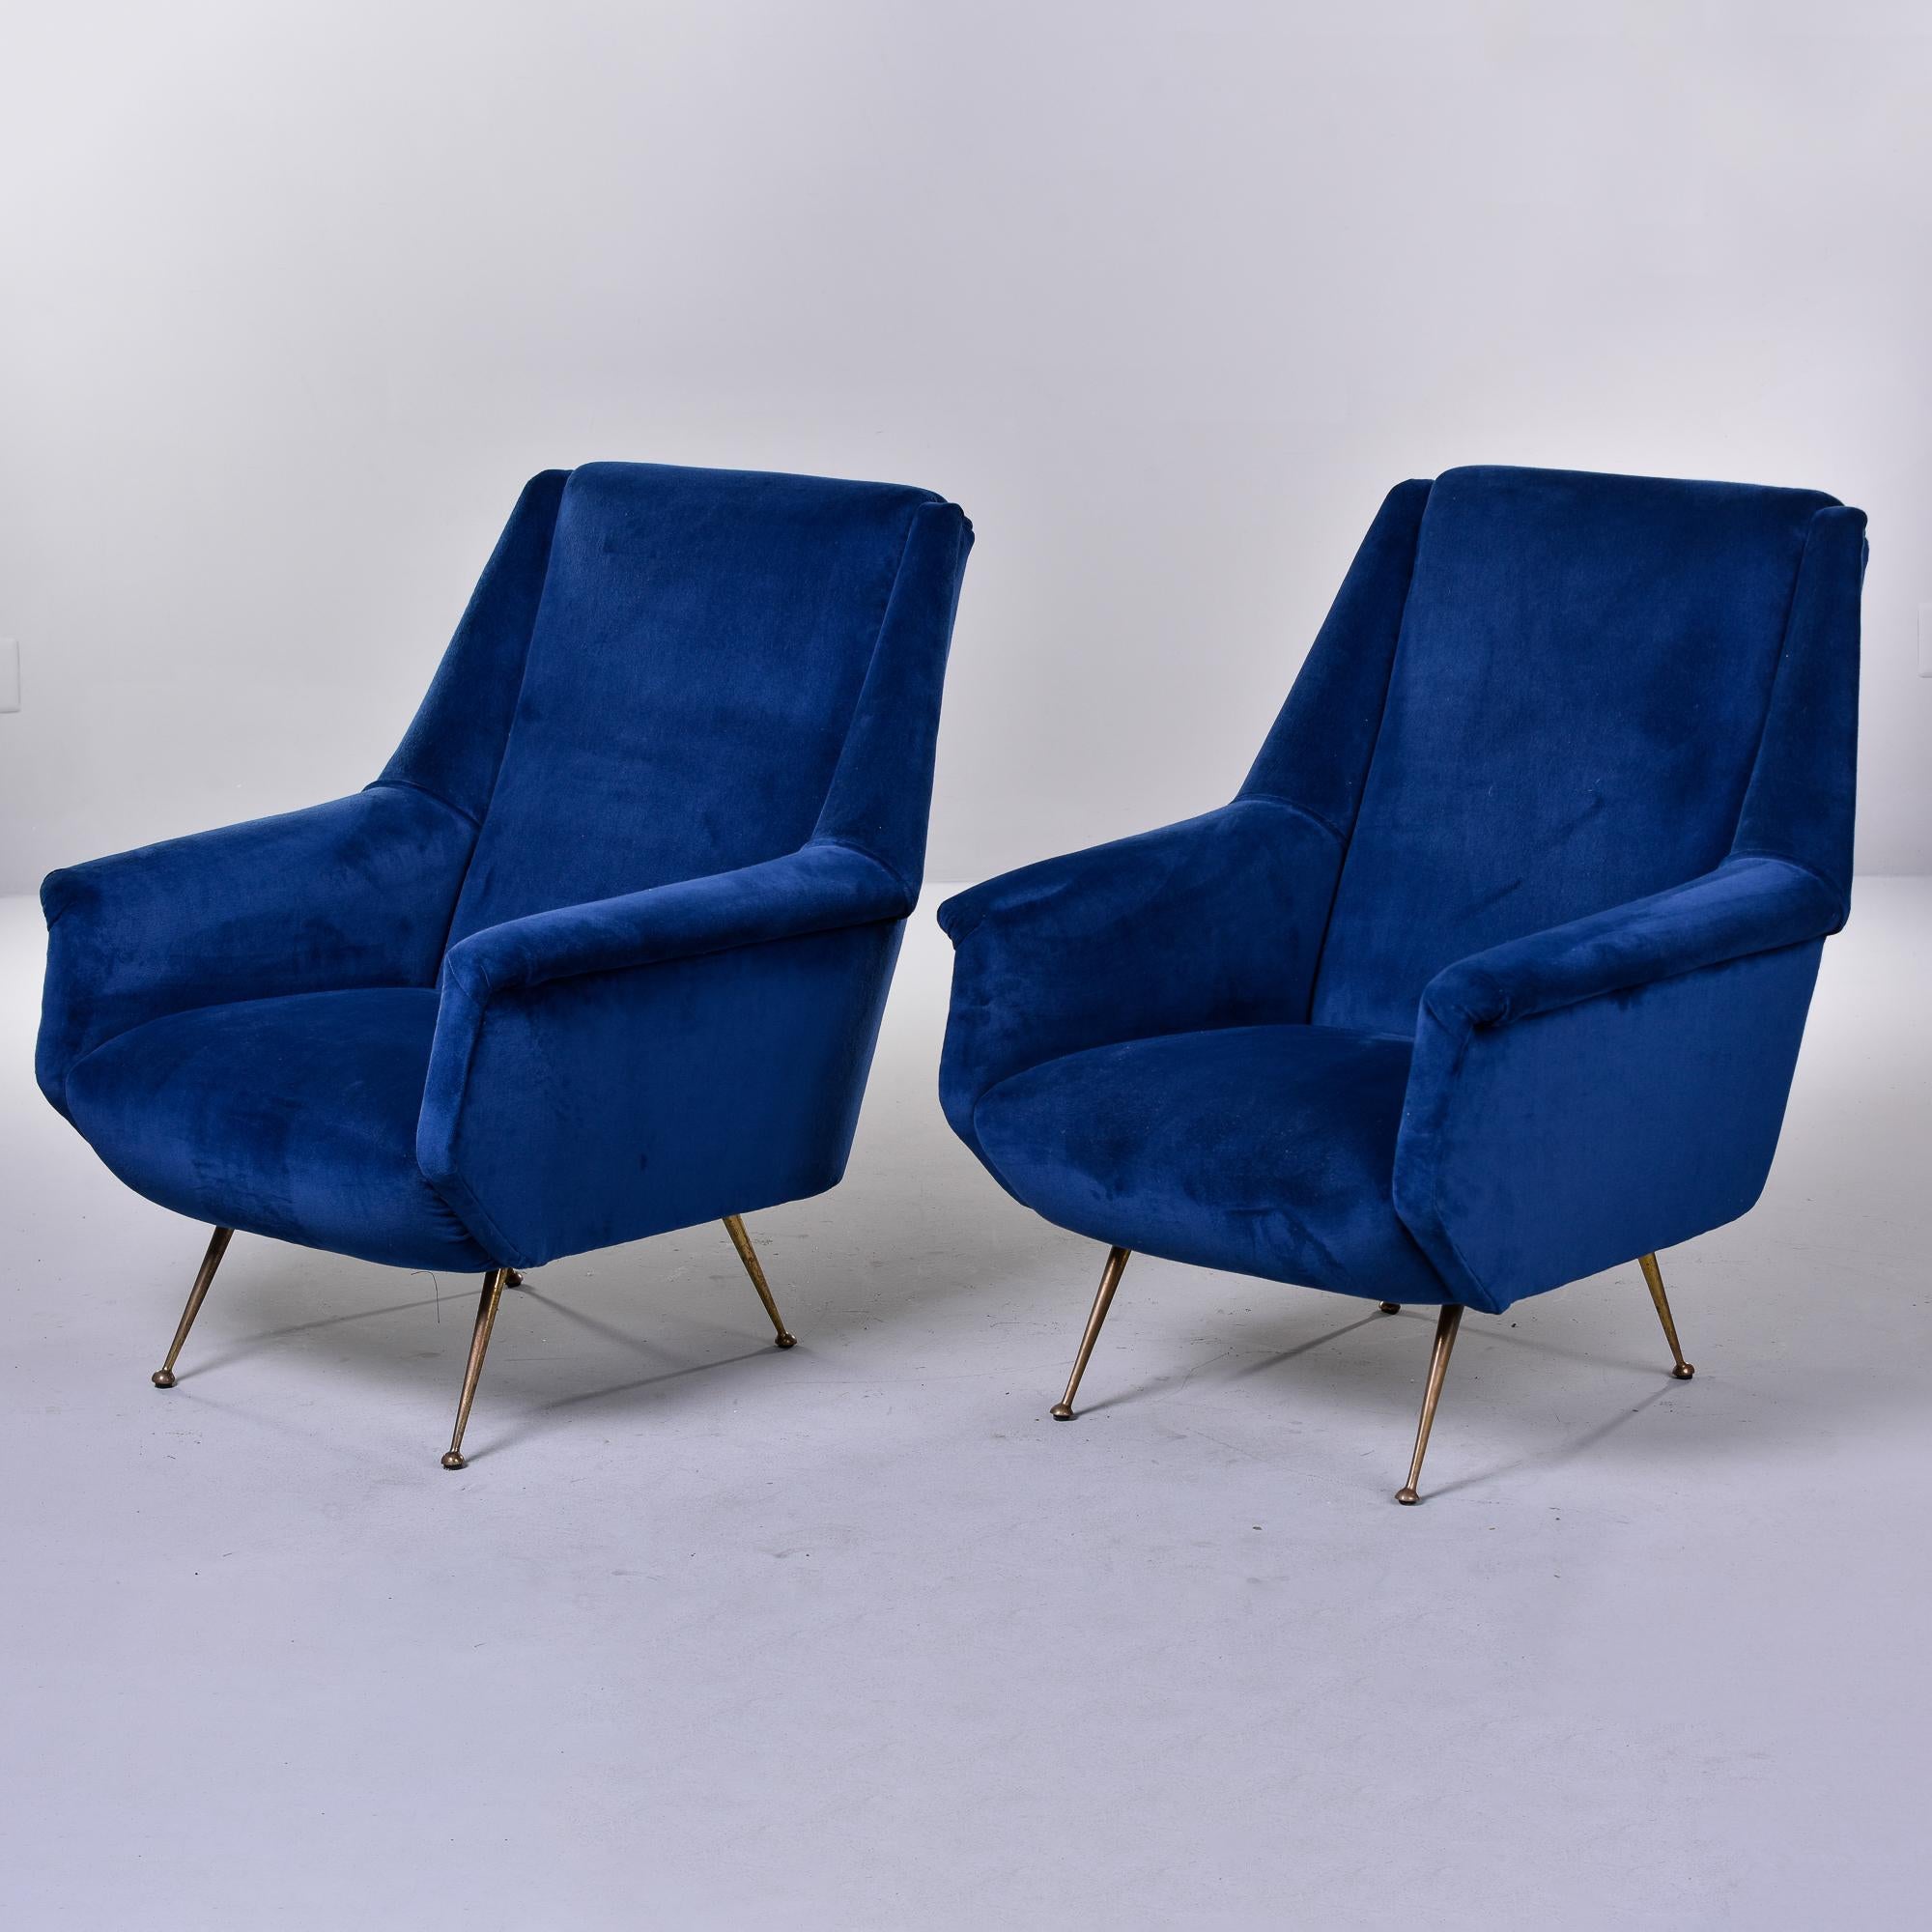 Found in Italy, this pair of circa 1950s sculptural arm chairs have narrow brass legs and new, deep blue velvet upholstery. Unlike many chairs from this era, these are generously proportioned with high backs. Unknown maker. Sold and priced as a